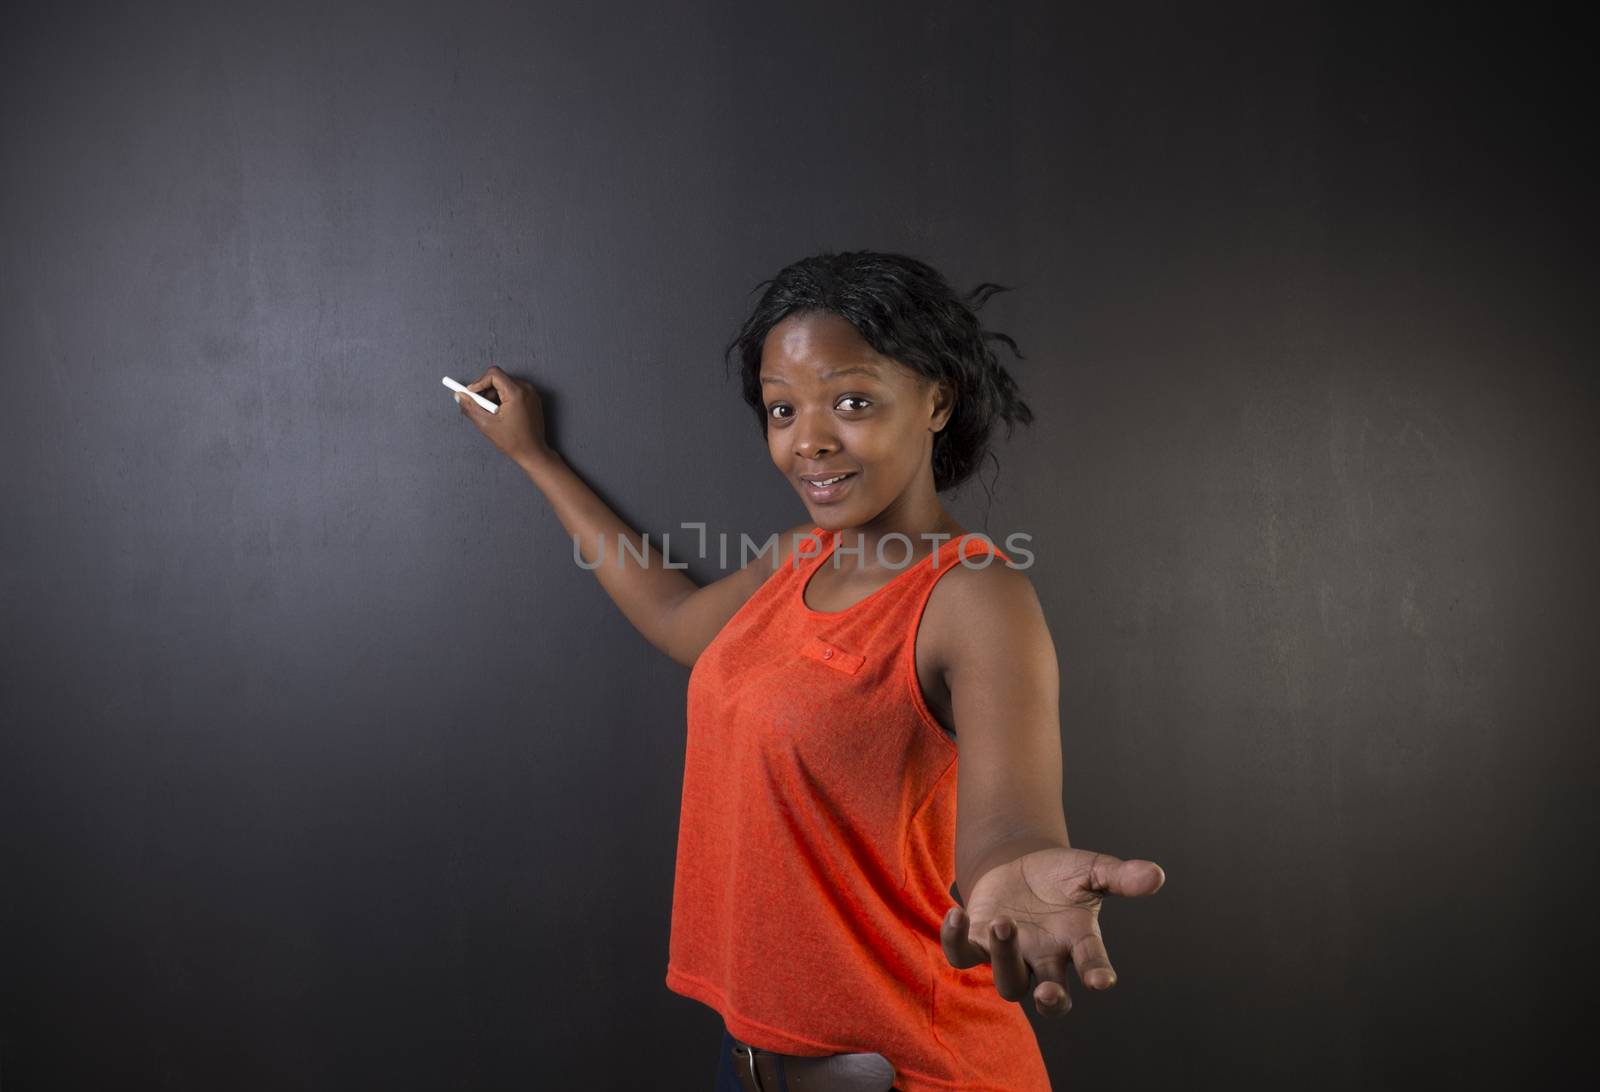 South African or African American woman teacher or student writing on blackboard by alistaircotton